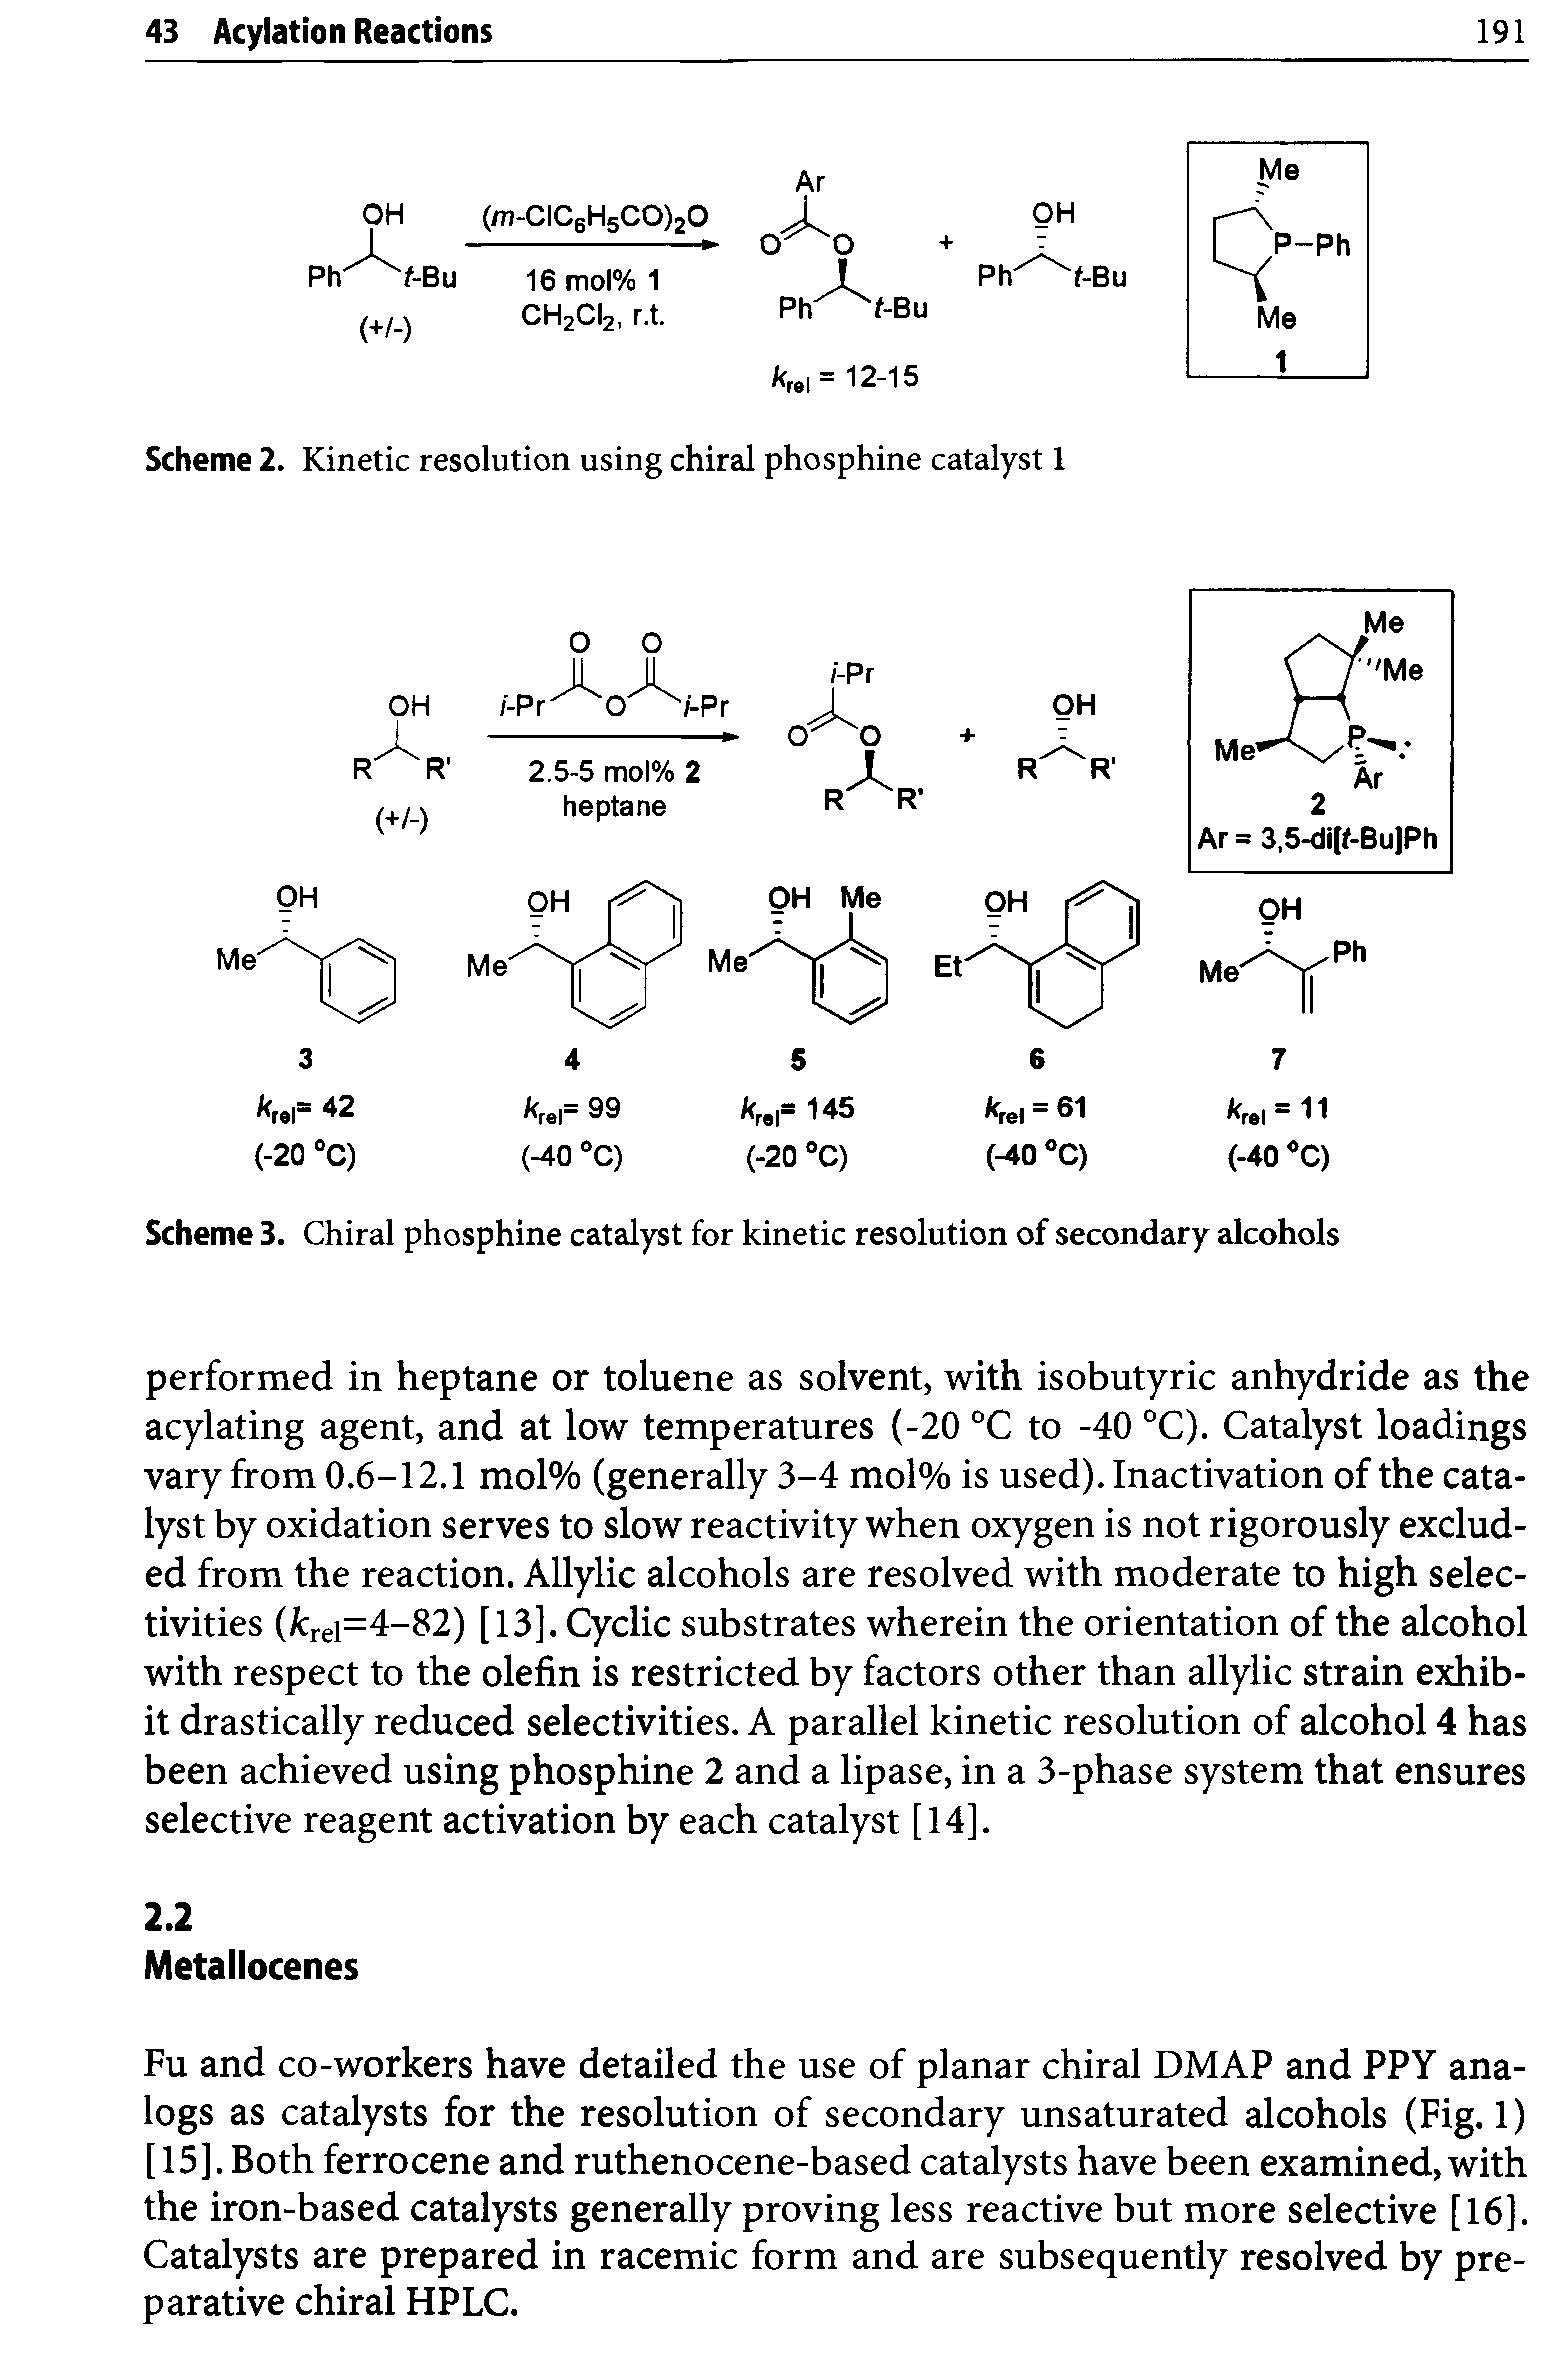 Scheme 3. Chiral phosphine catalyst for kinetic resolution of secondary alcohols...